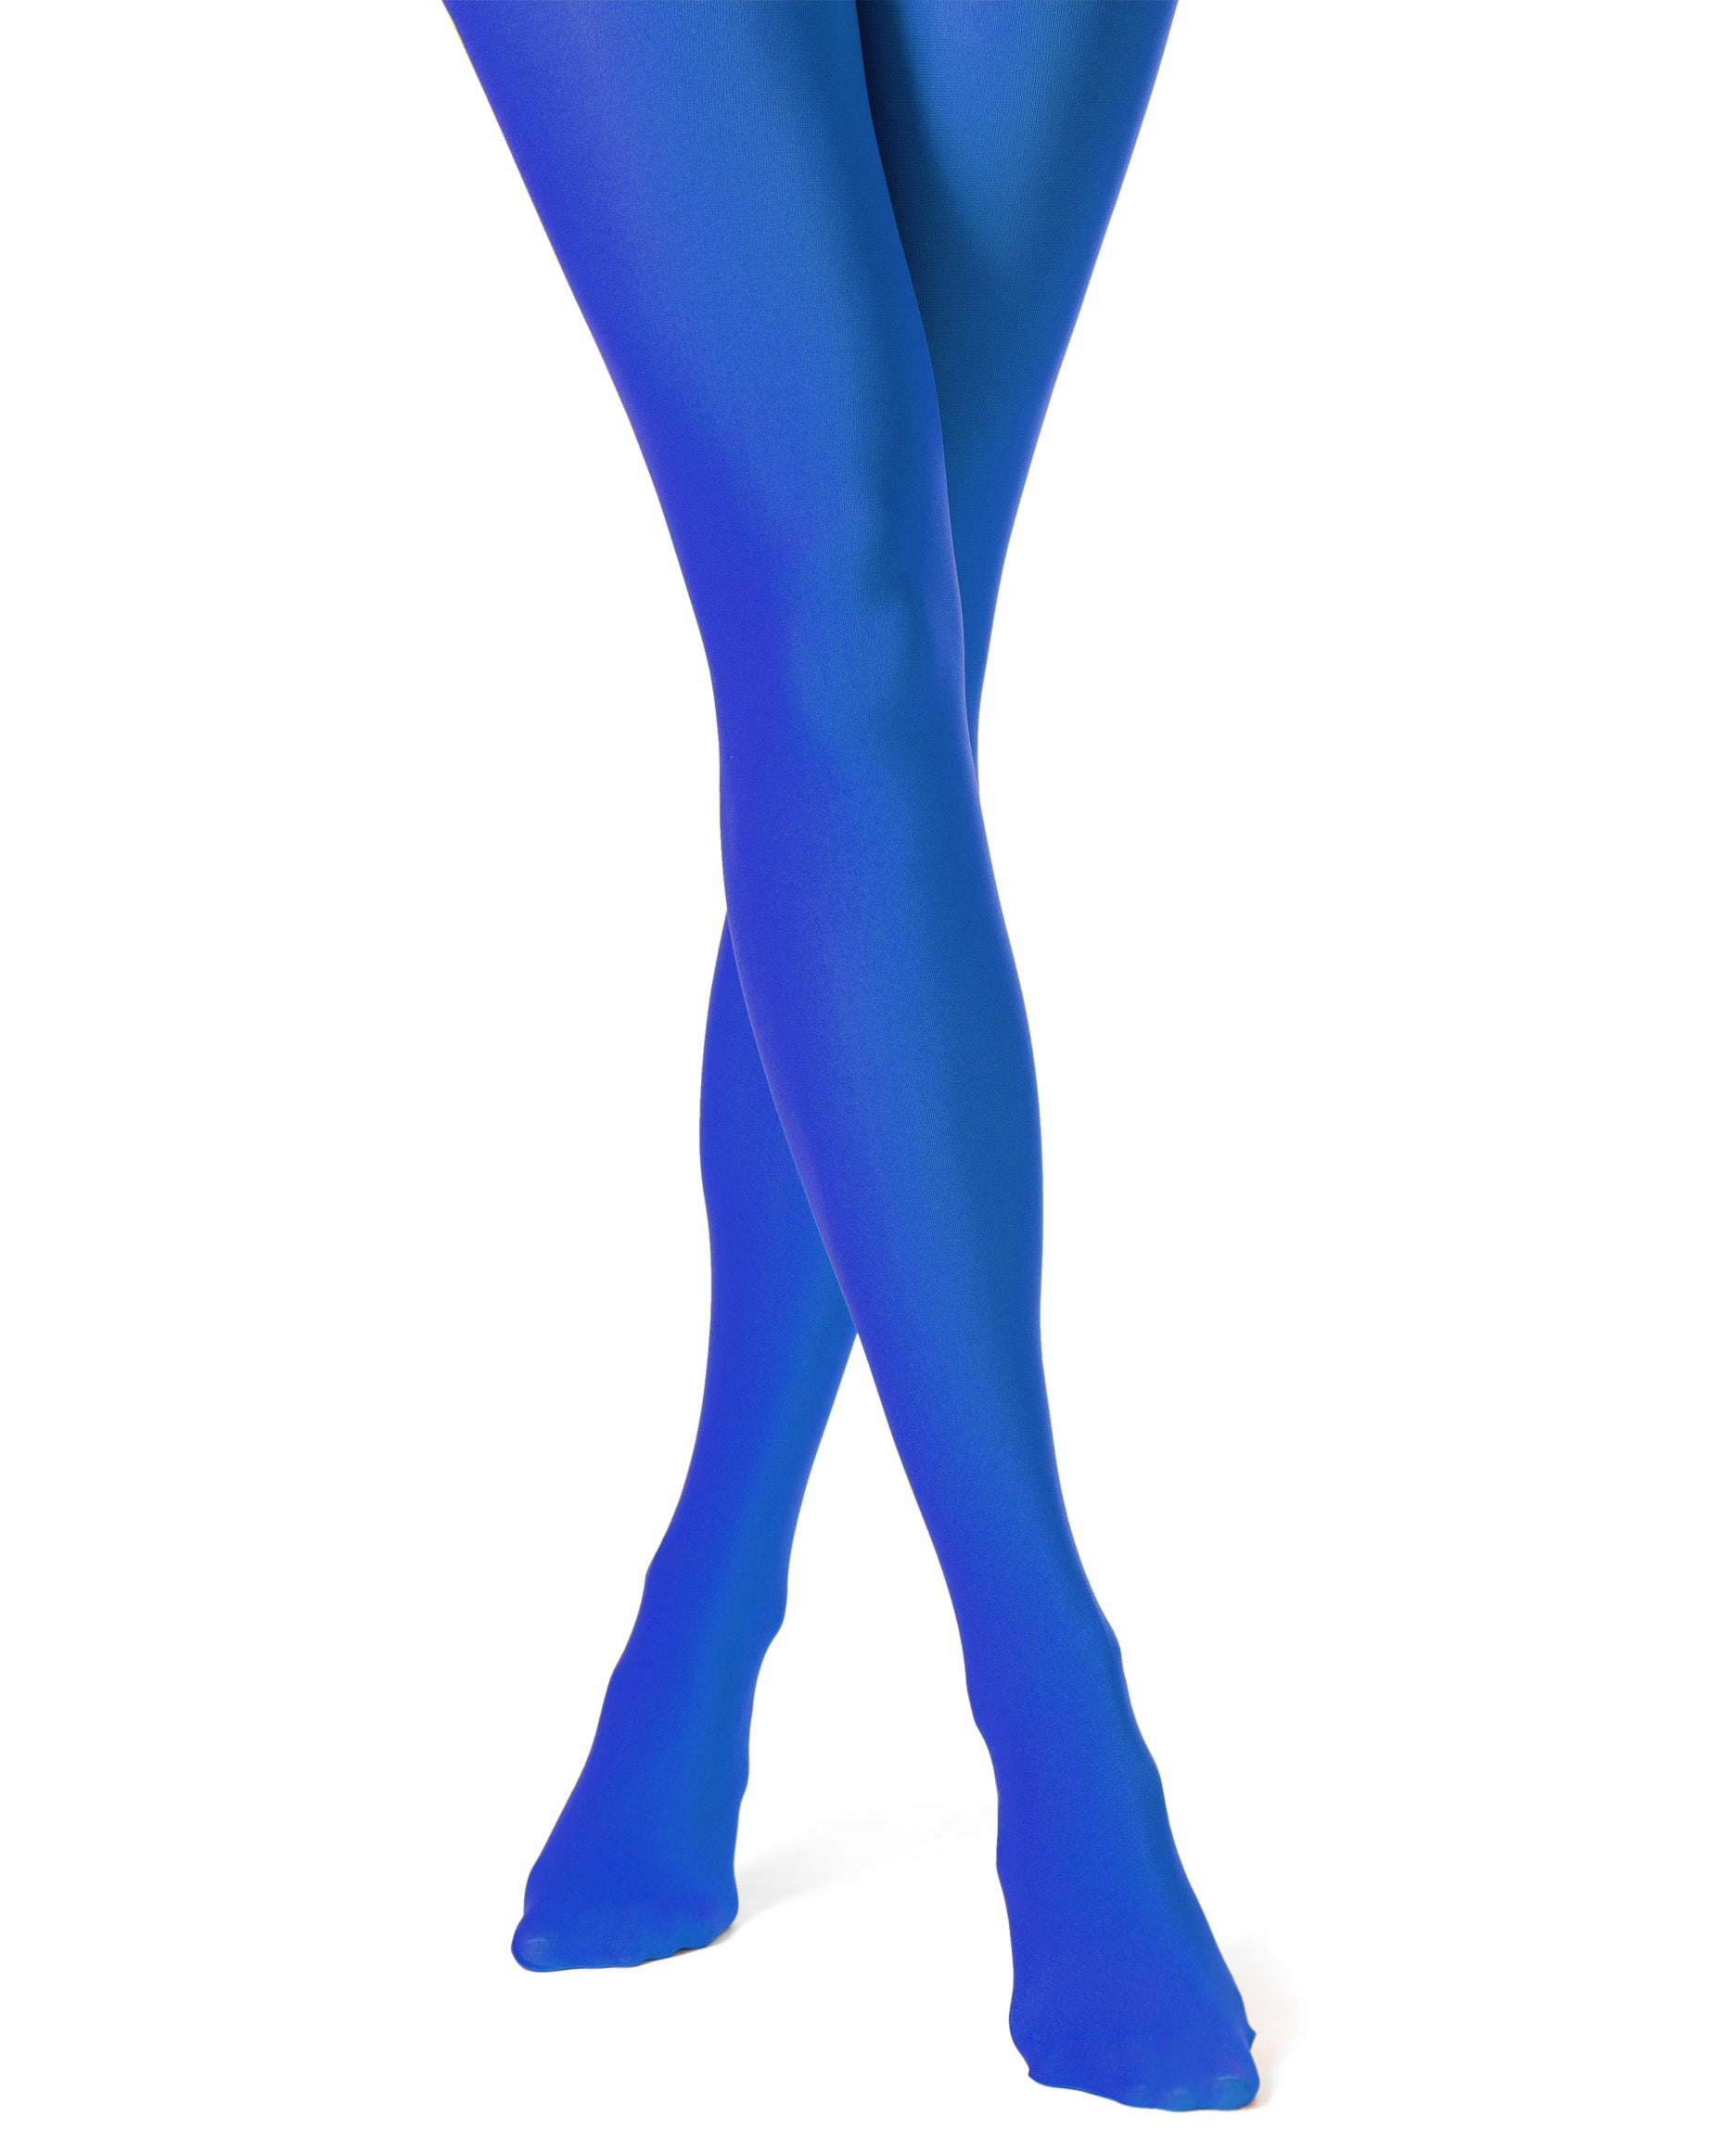 Trasparenze Sophie 70 Collant - coloured opaque tights in royal blue (cina)